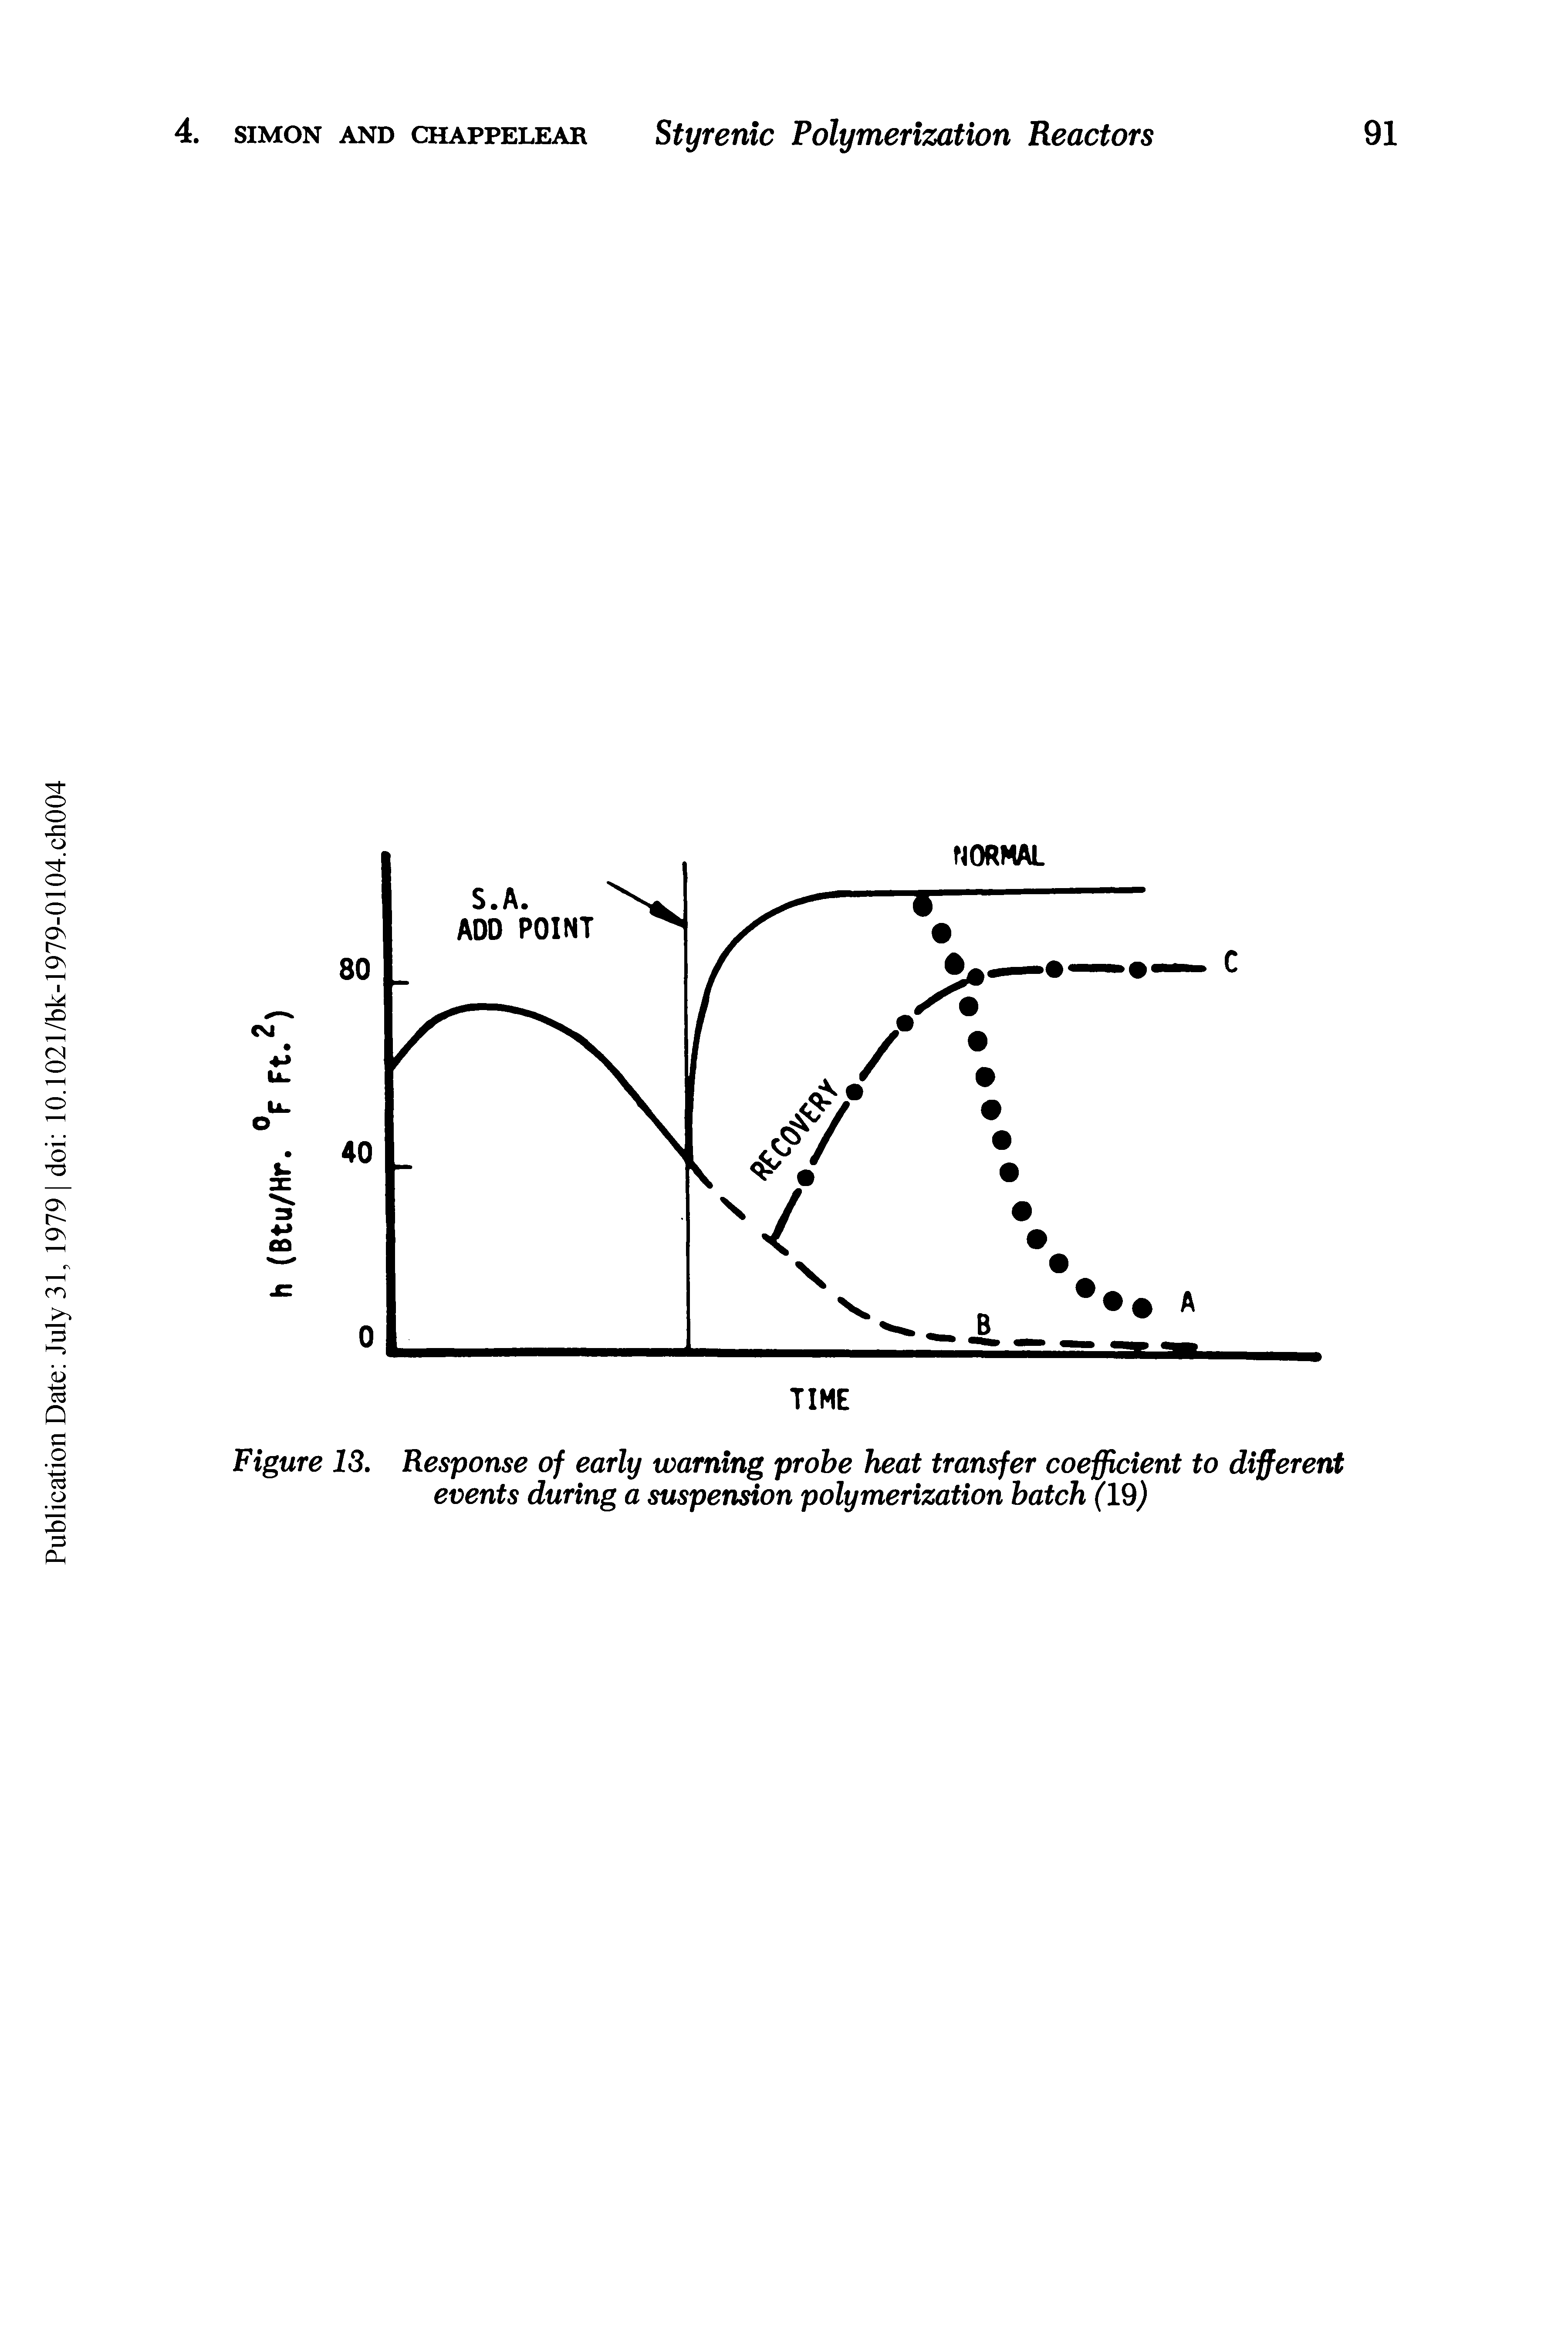 Figure 13. Response of early warning probe heat transfer coefficient to different events during a suspension polymerization batch (19)...